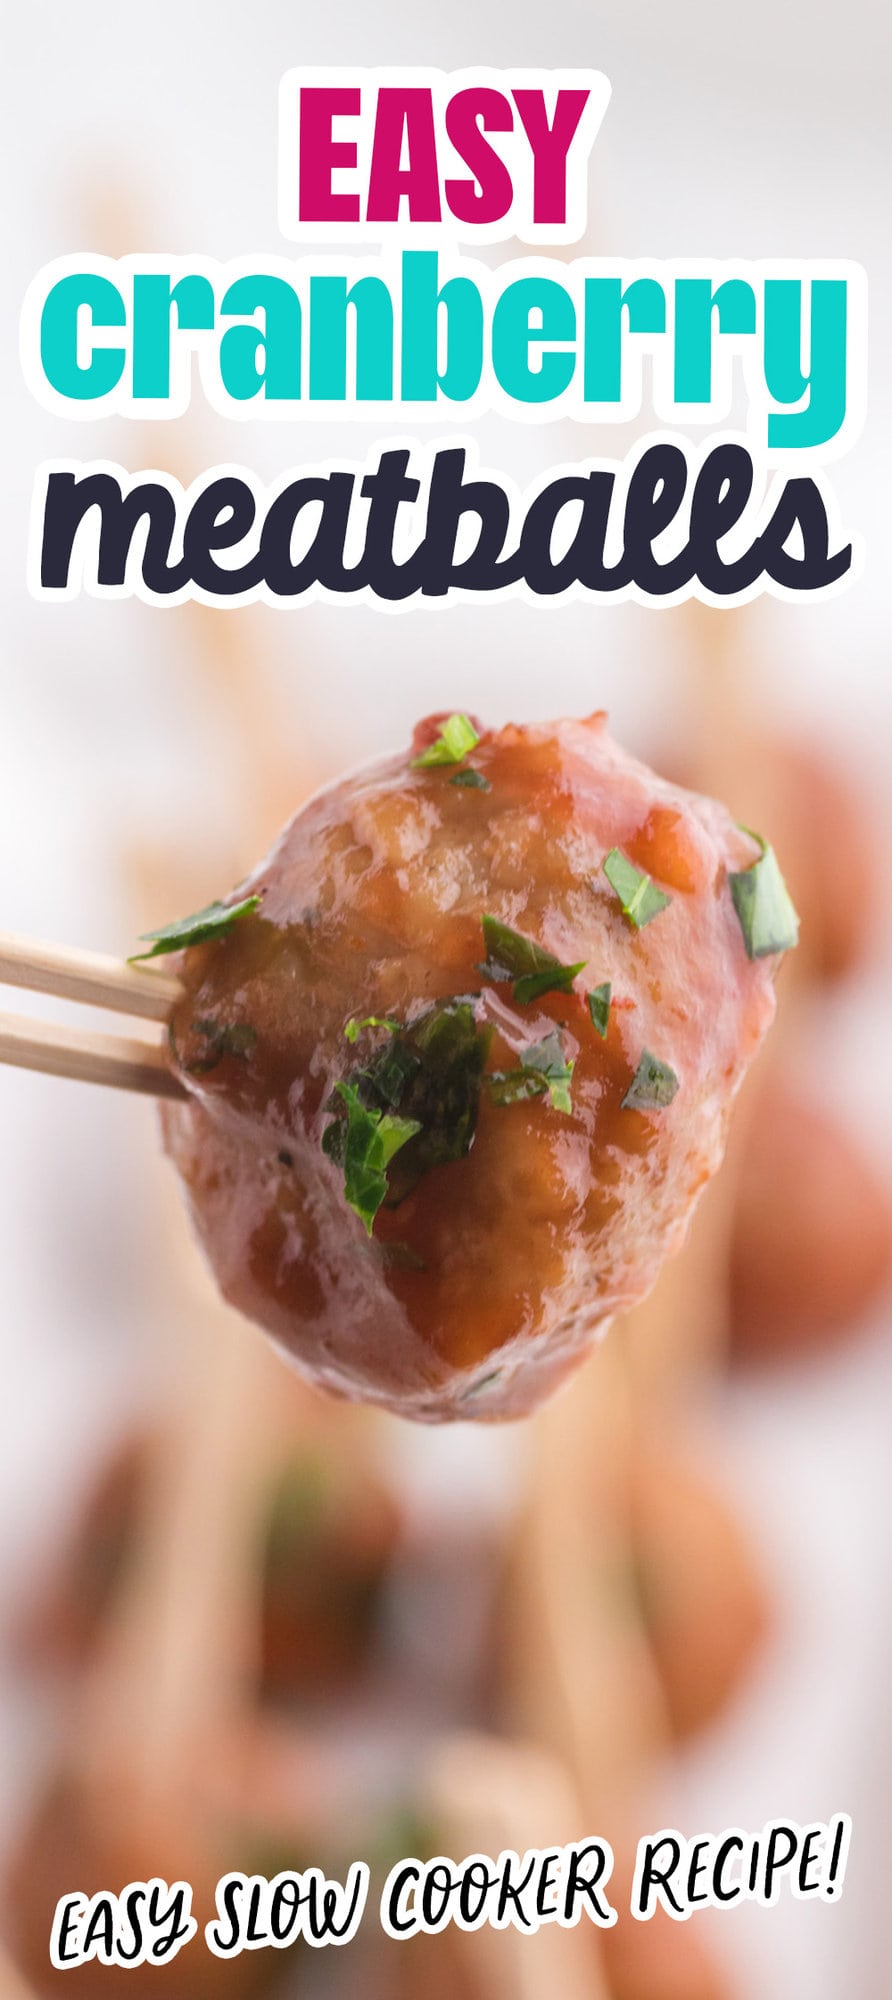 meatballs in a slow cooker in cranberry sauce